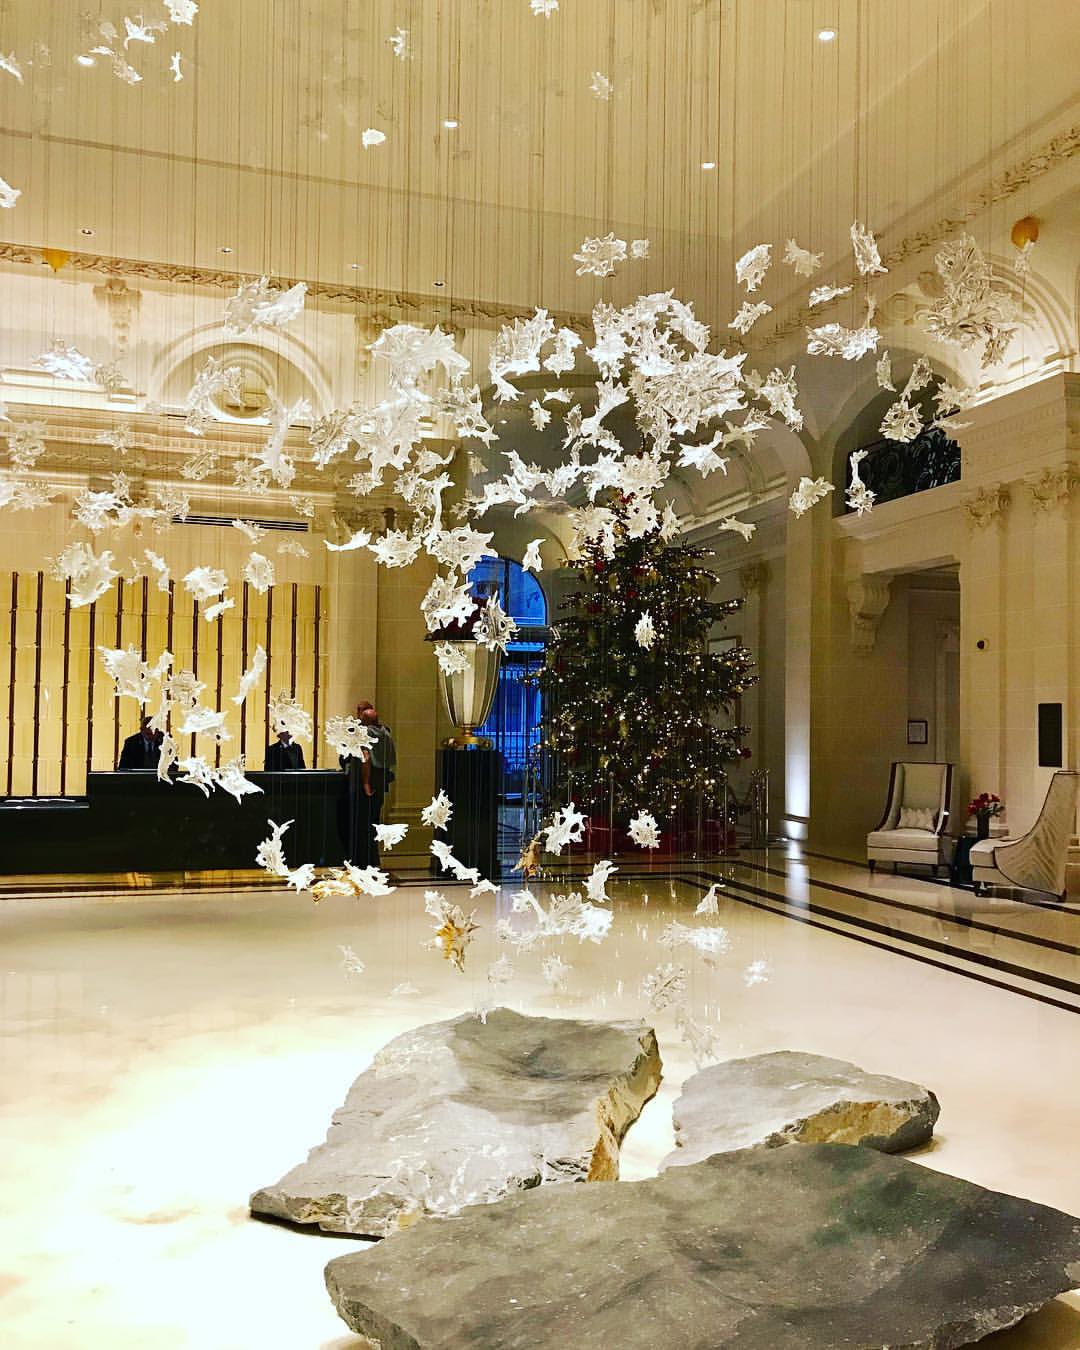 lolo chapters lolochapters profile deer accent table bourse magical moment captured thepeninsulaparis peninsulahotels such wonderful paris holiday break chrome door threshold home